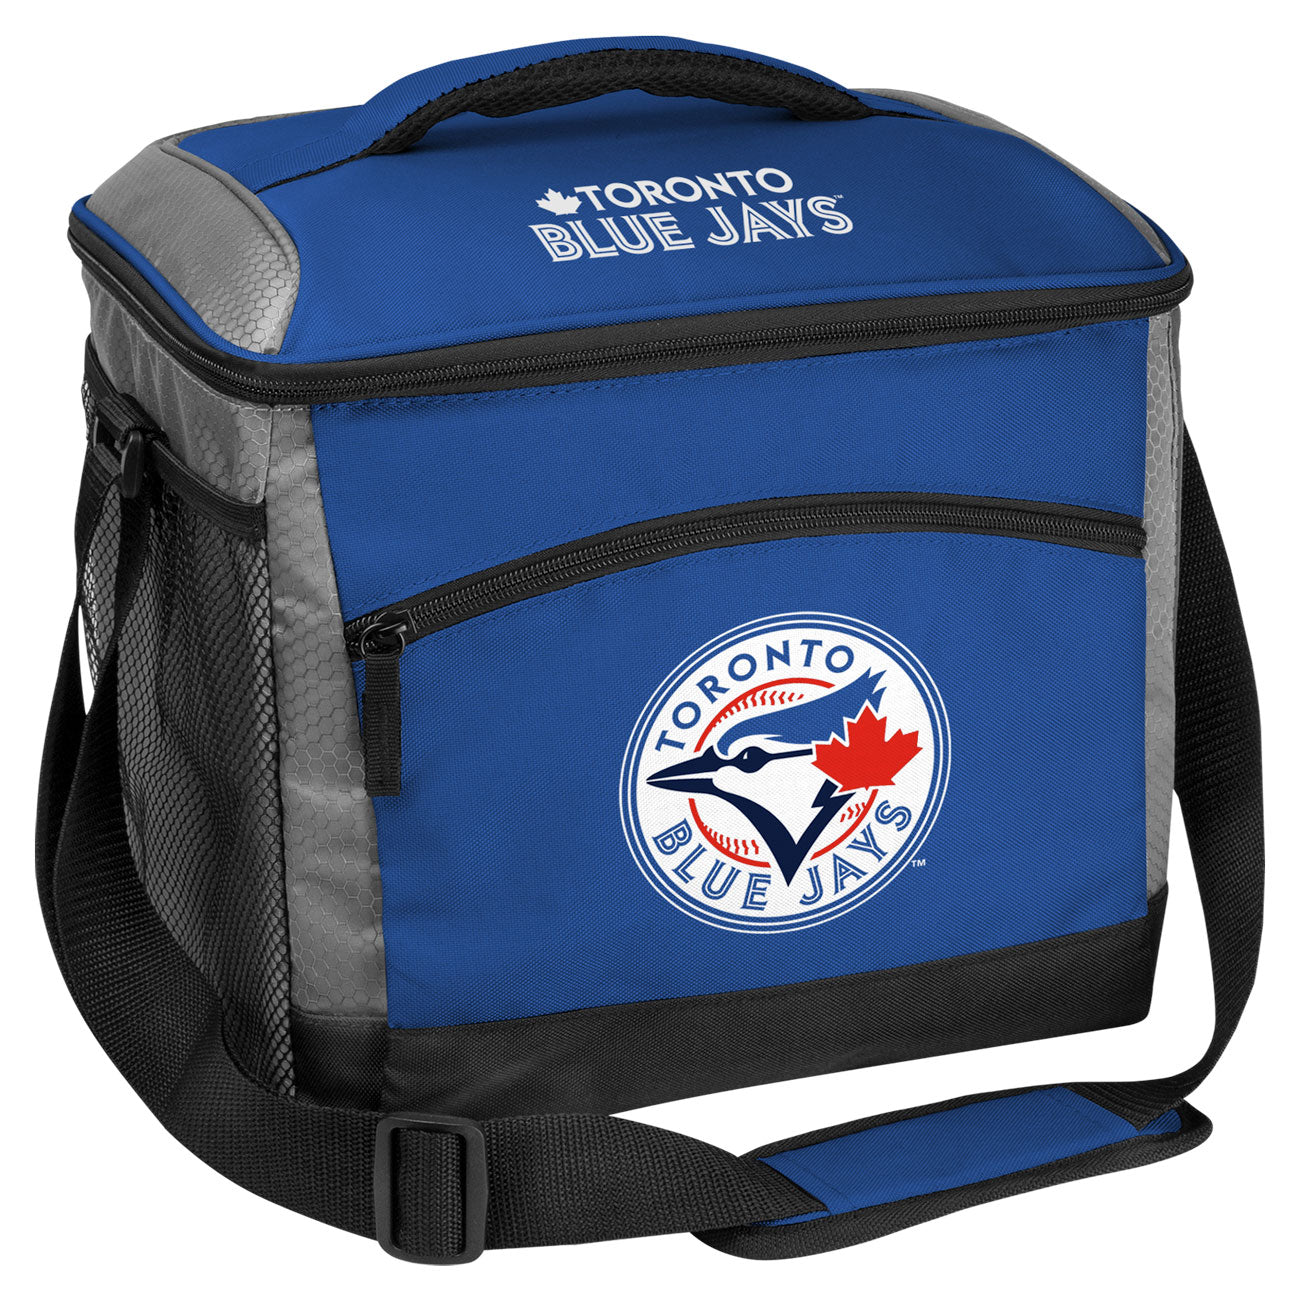 Rawlings MLB Blue Jays Cooler - 24 Cans